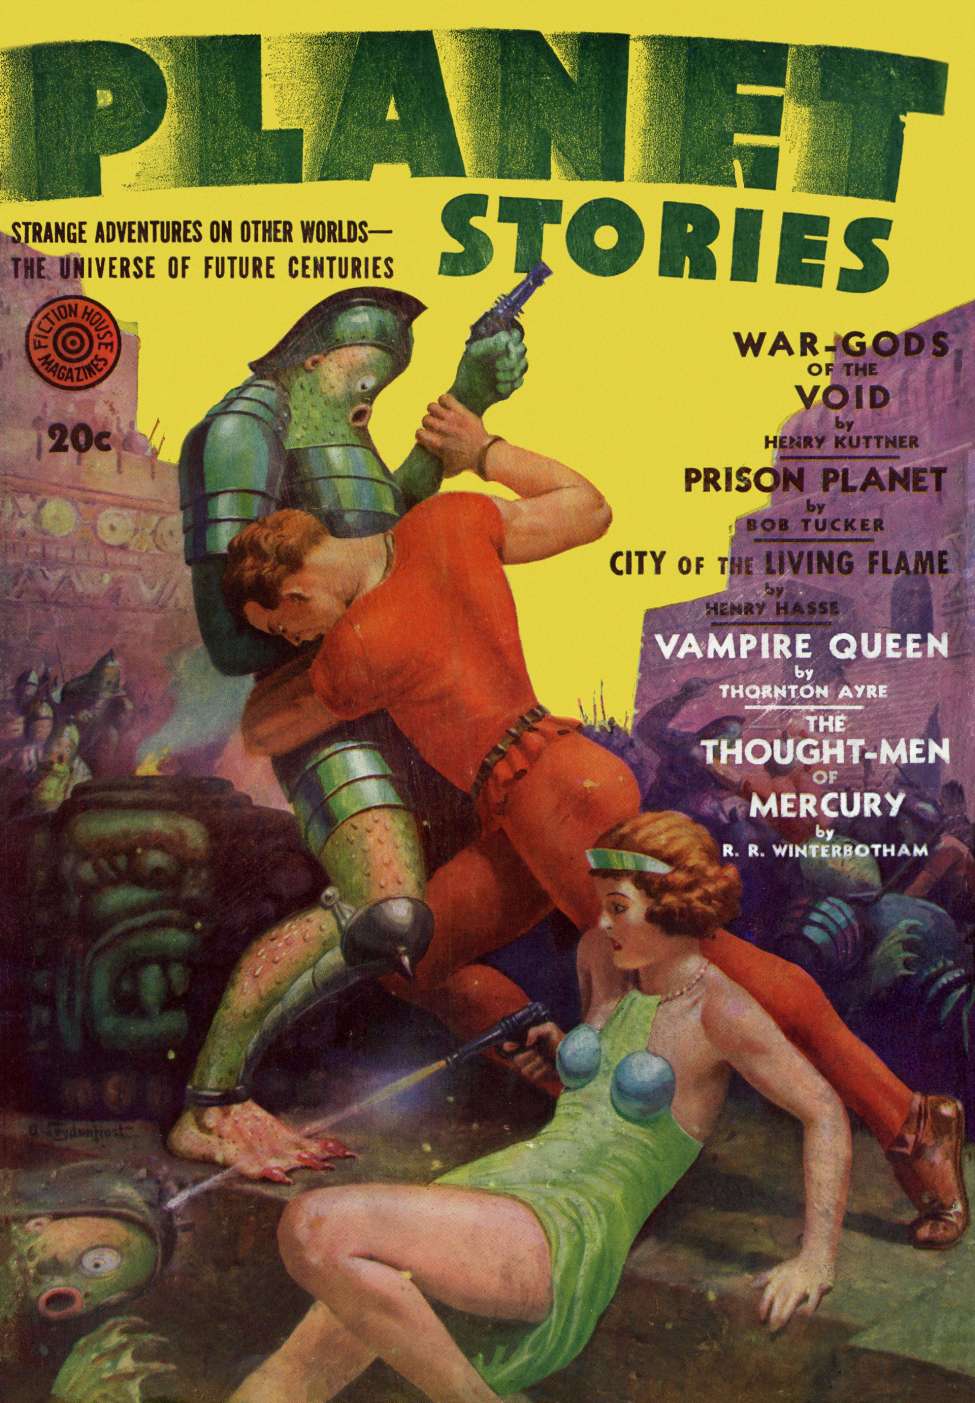 Book Cover For Planet Stories v1 12 - The Thought-Men of Mercury - R. R. Winterbotham